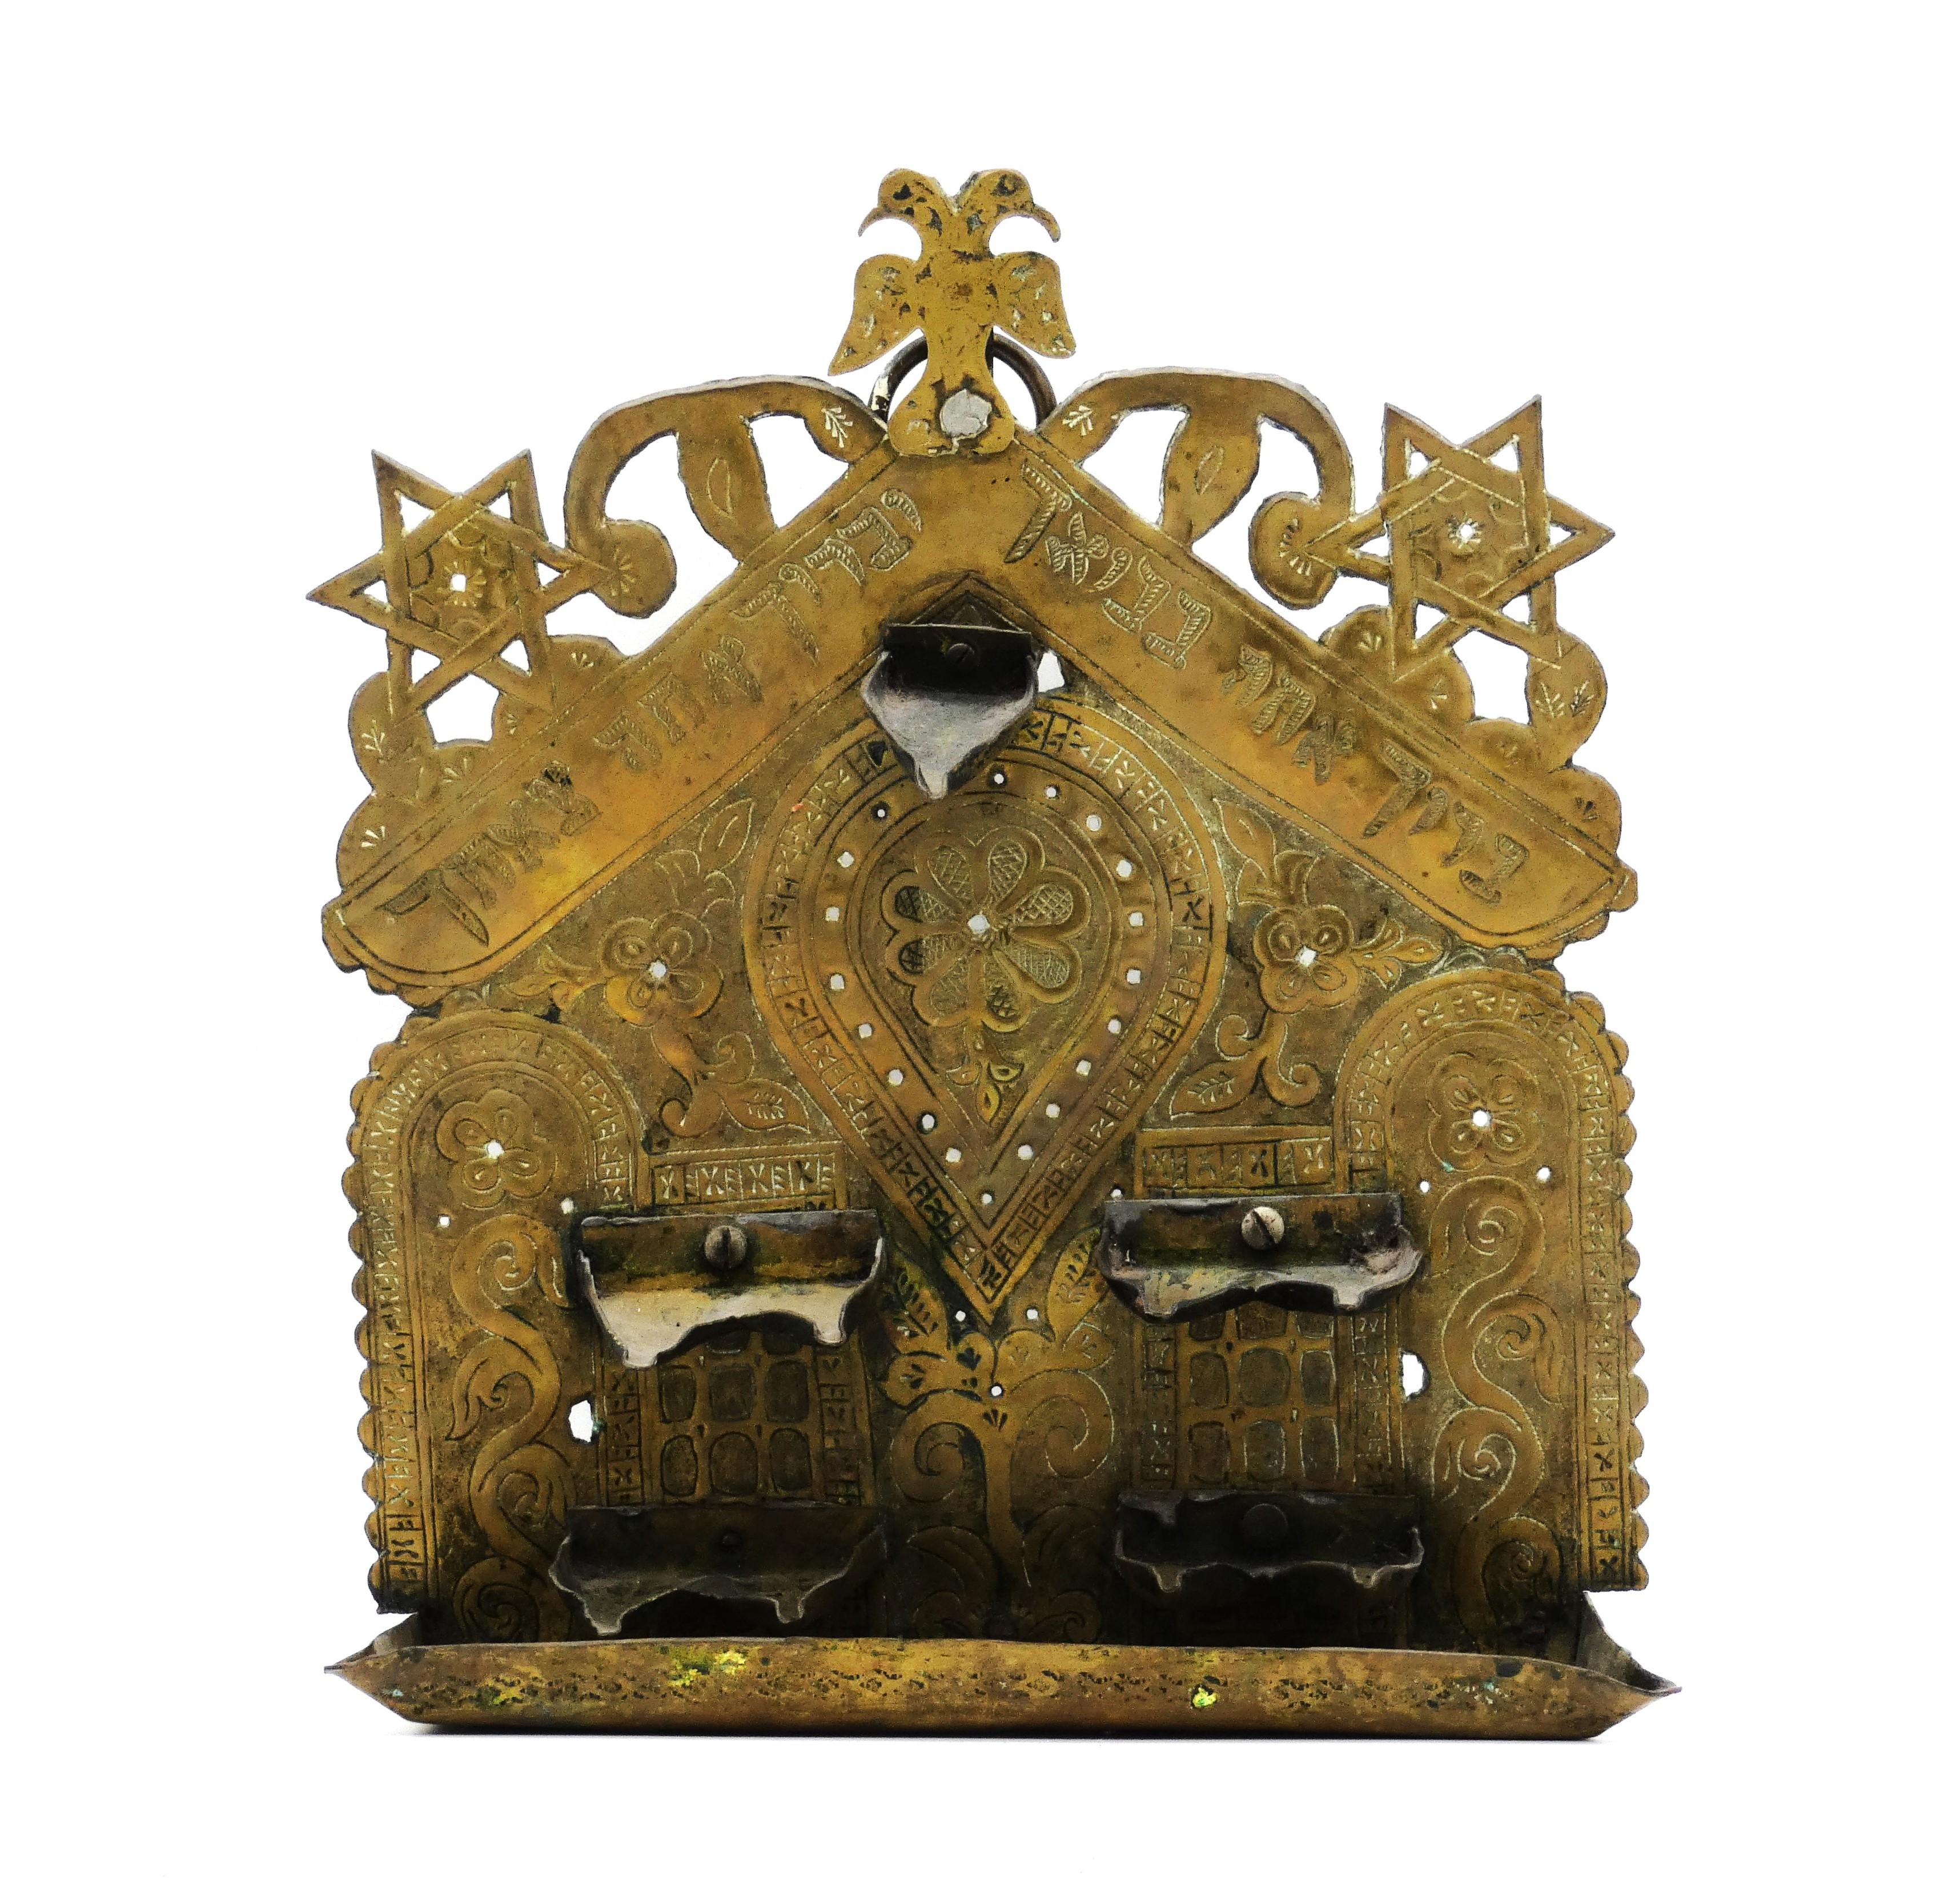 This  North African Hanukkah lamp has unique structural characteristics not seen in many Antique Hanukkah lamps.

Engraved on the backplate are many scrolling floral and foliate designs bordered by archways, windows, and teardrop motifs.

Surmounted